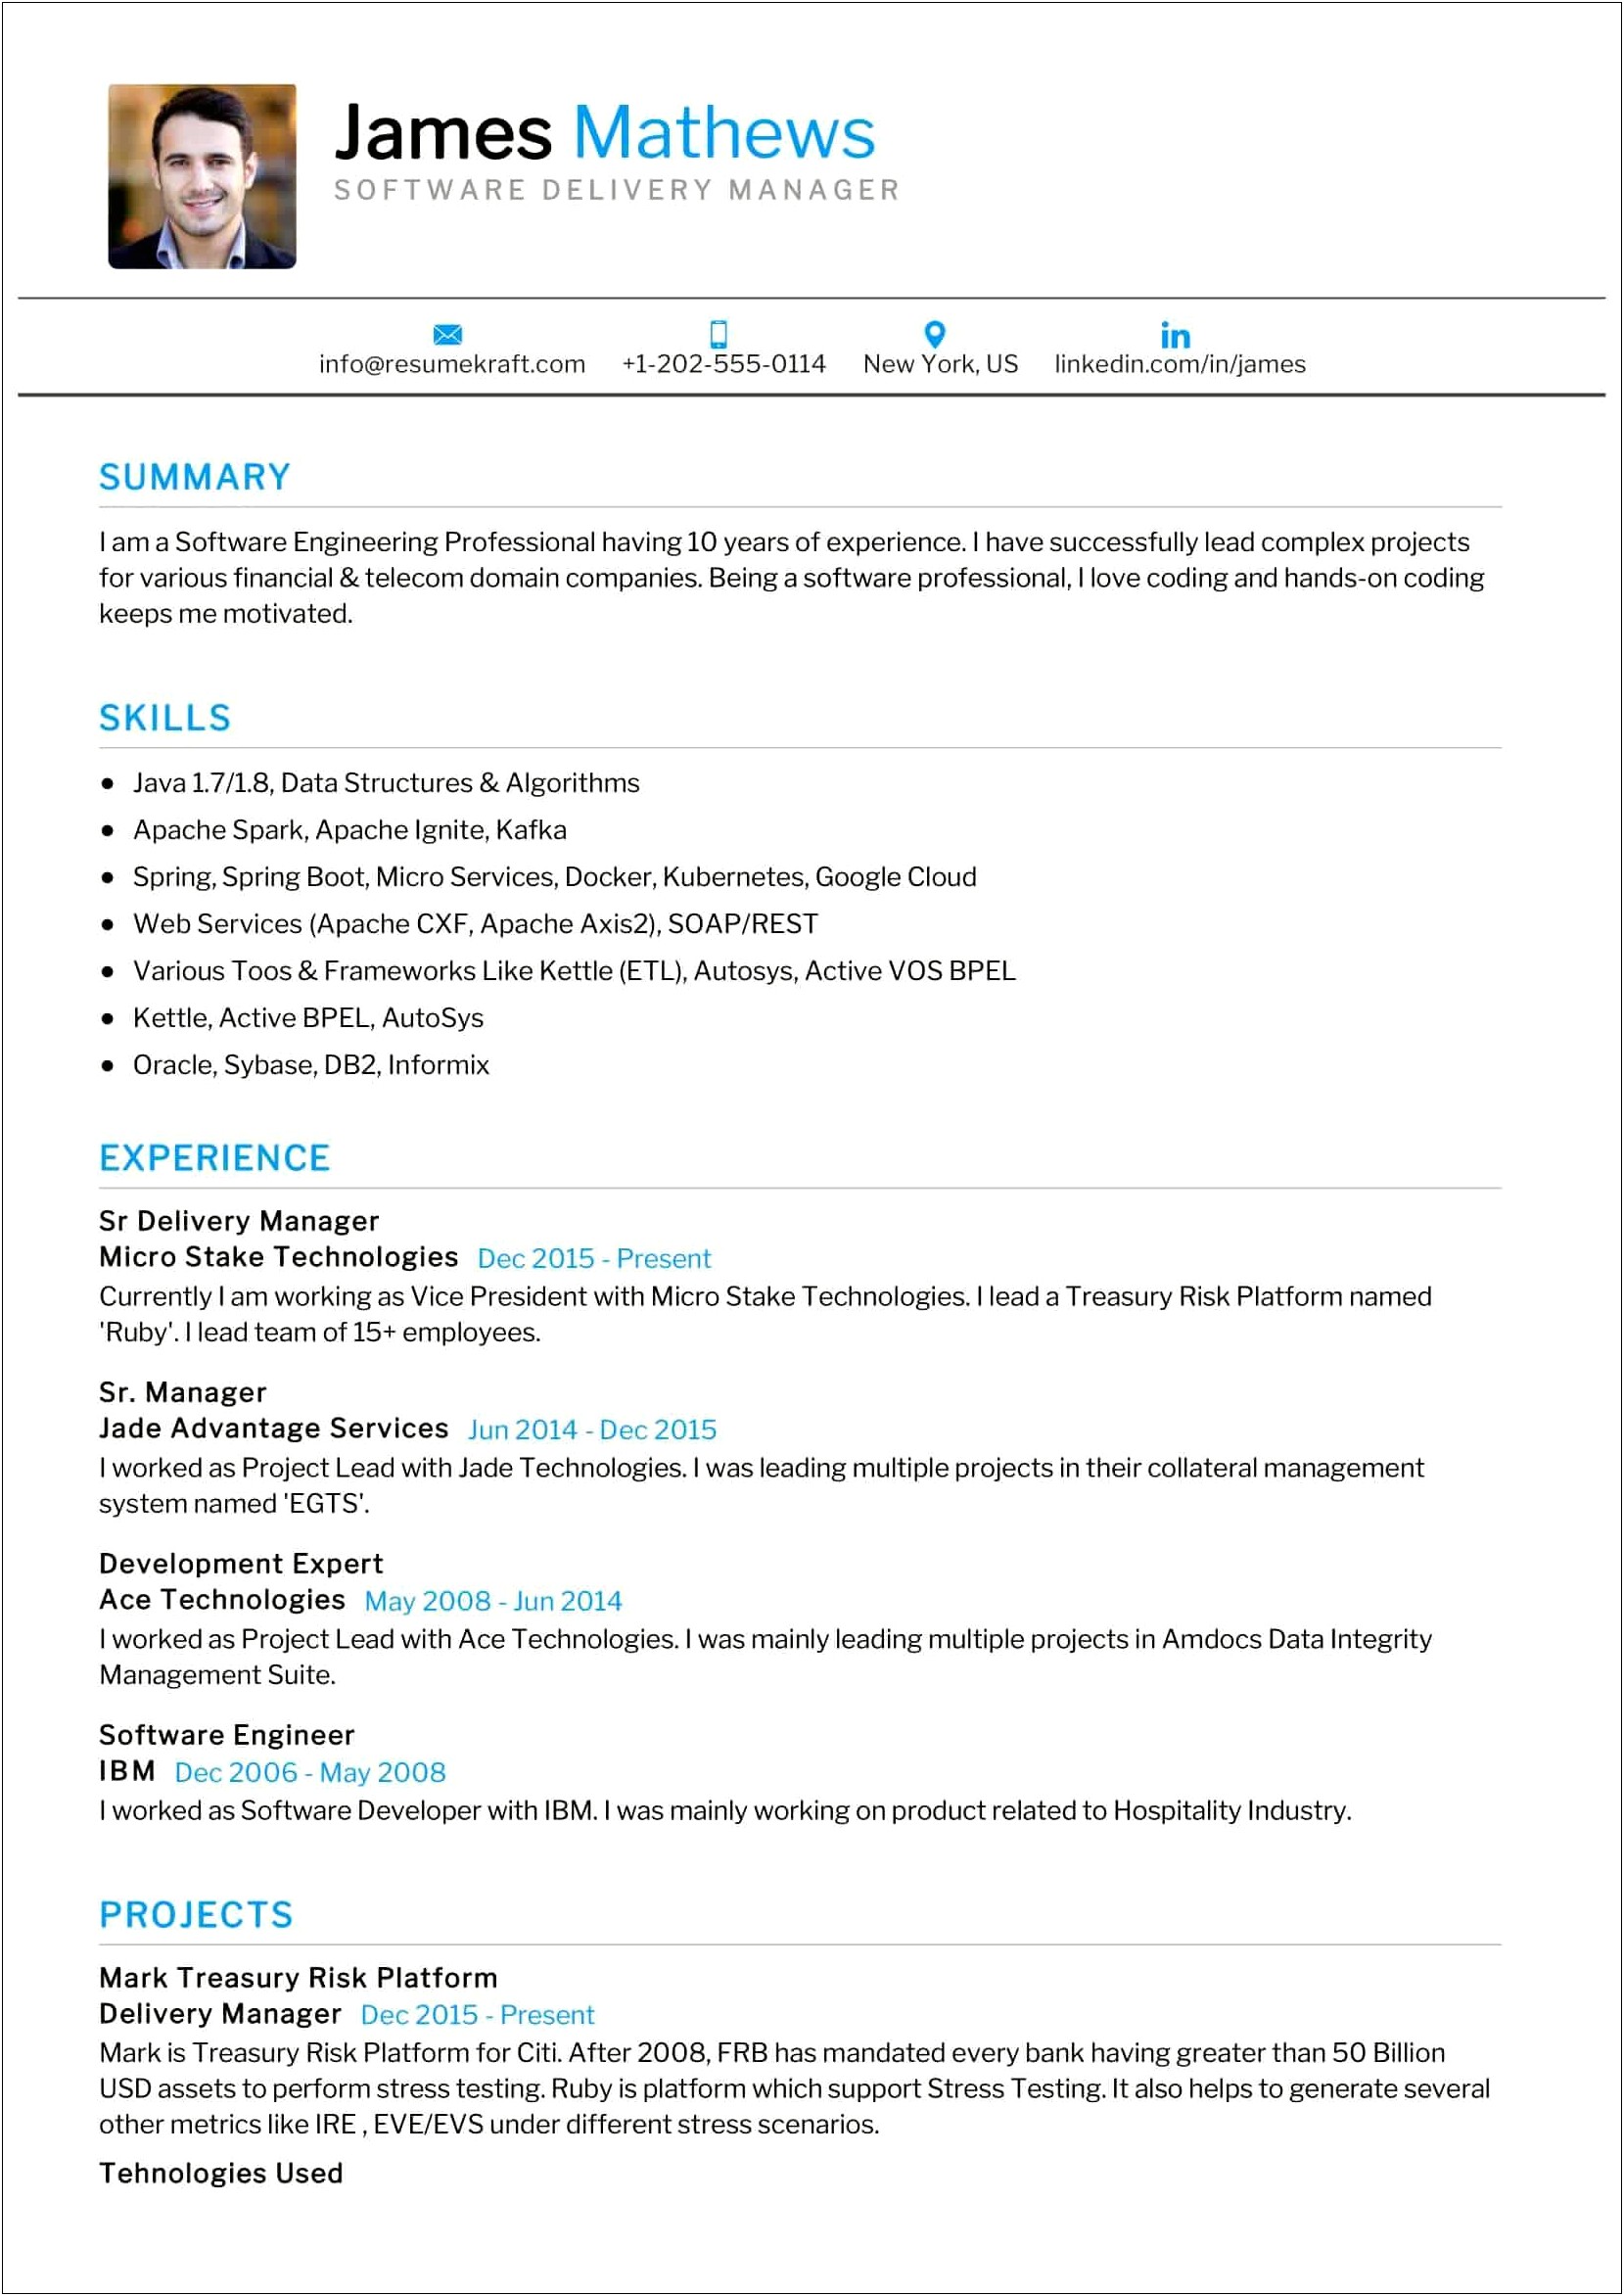 Telecom Expense Management Experience In Resume